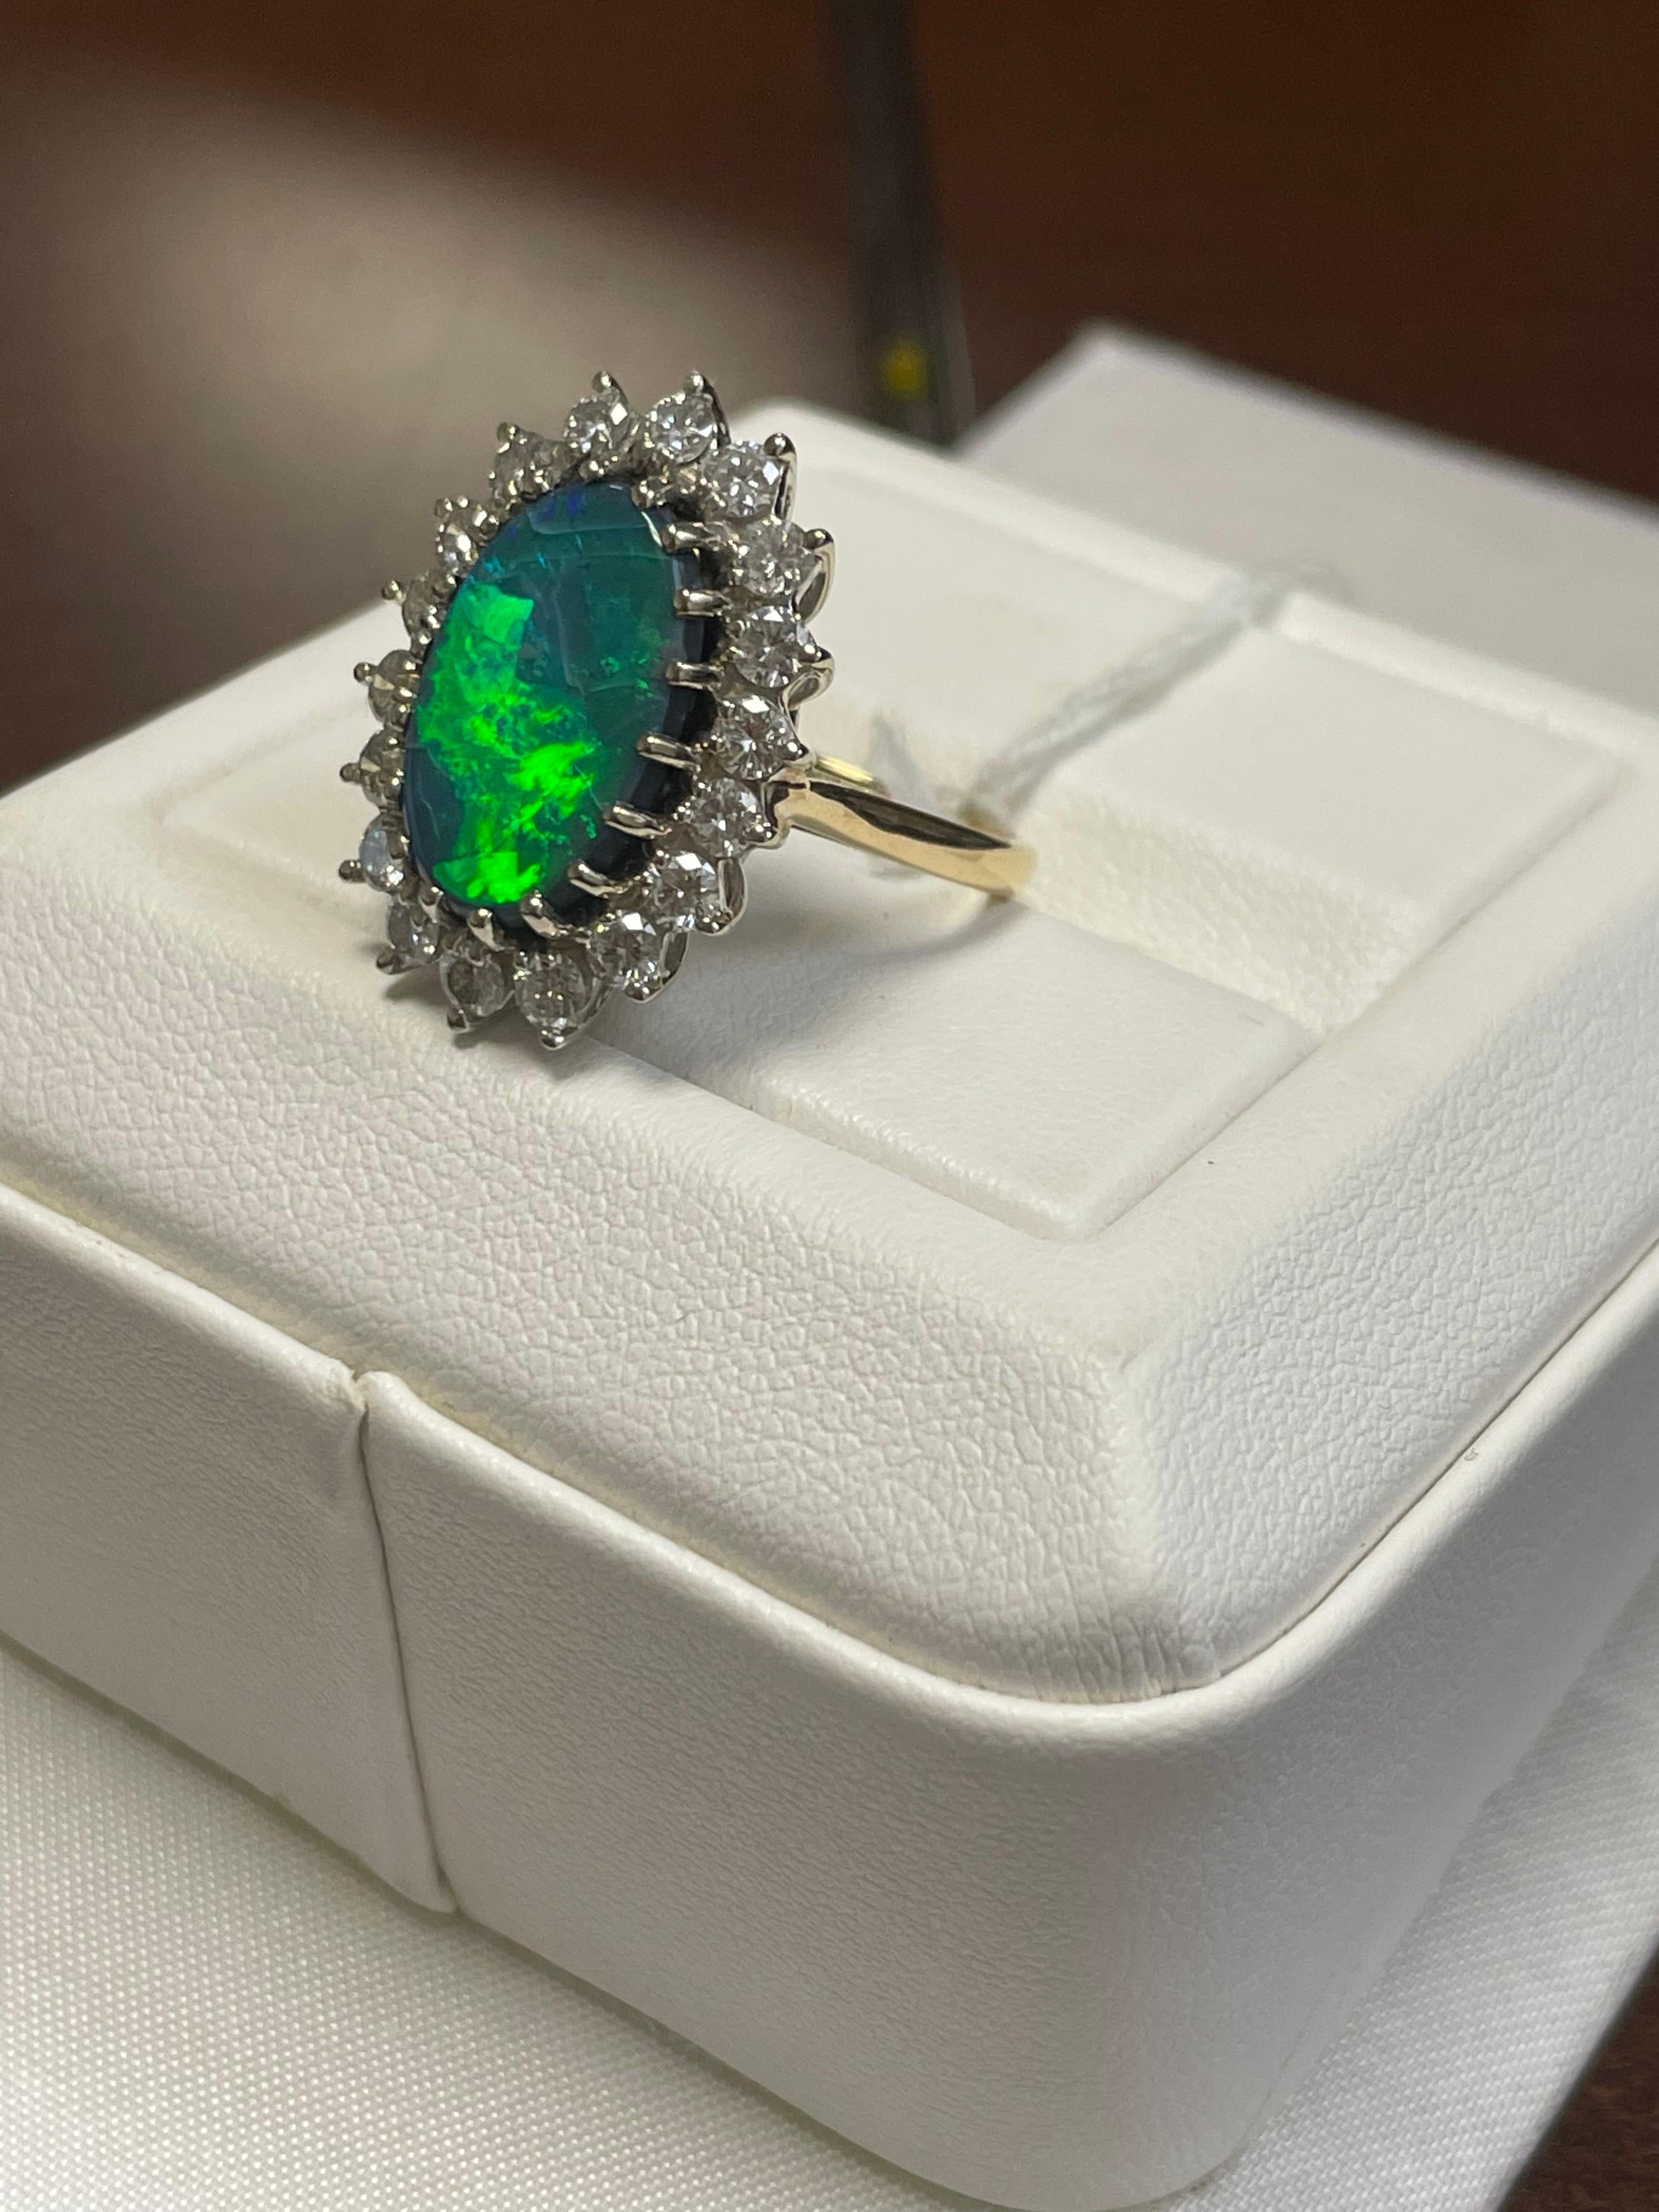 One lady's black opal in blue-green fire color with an average saturation.  Contains a very bright pinfire pattern.  Cabochon, oval shape.  Condition is crazed.  Measurements are 15 x 10.00 mm. Weight is 3.5 carats.  18 round brilliant-cut diamonds.